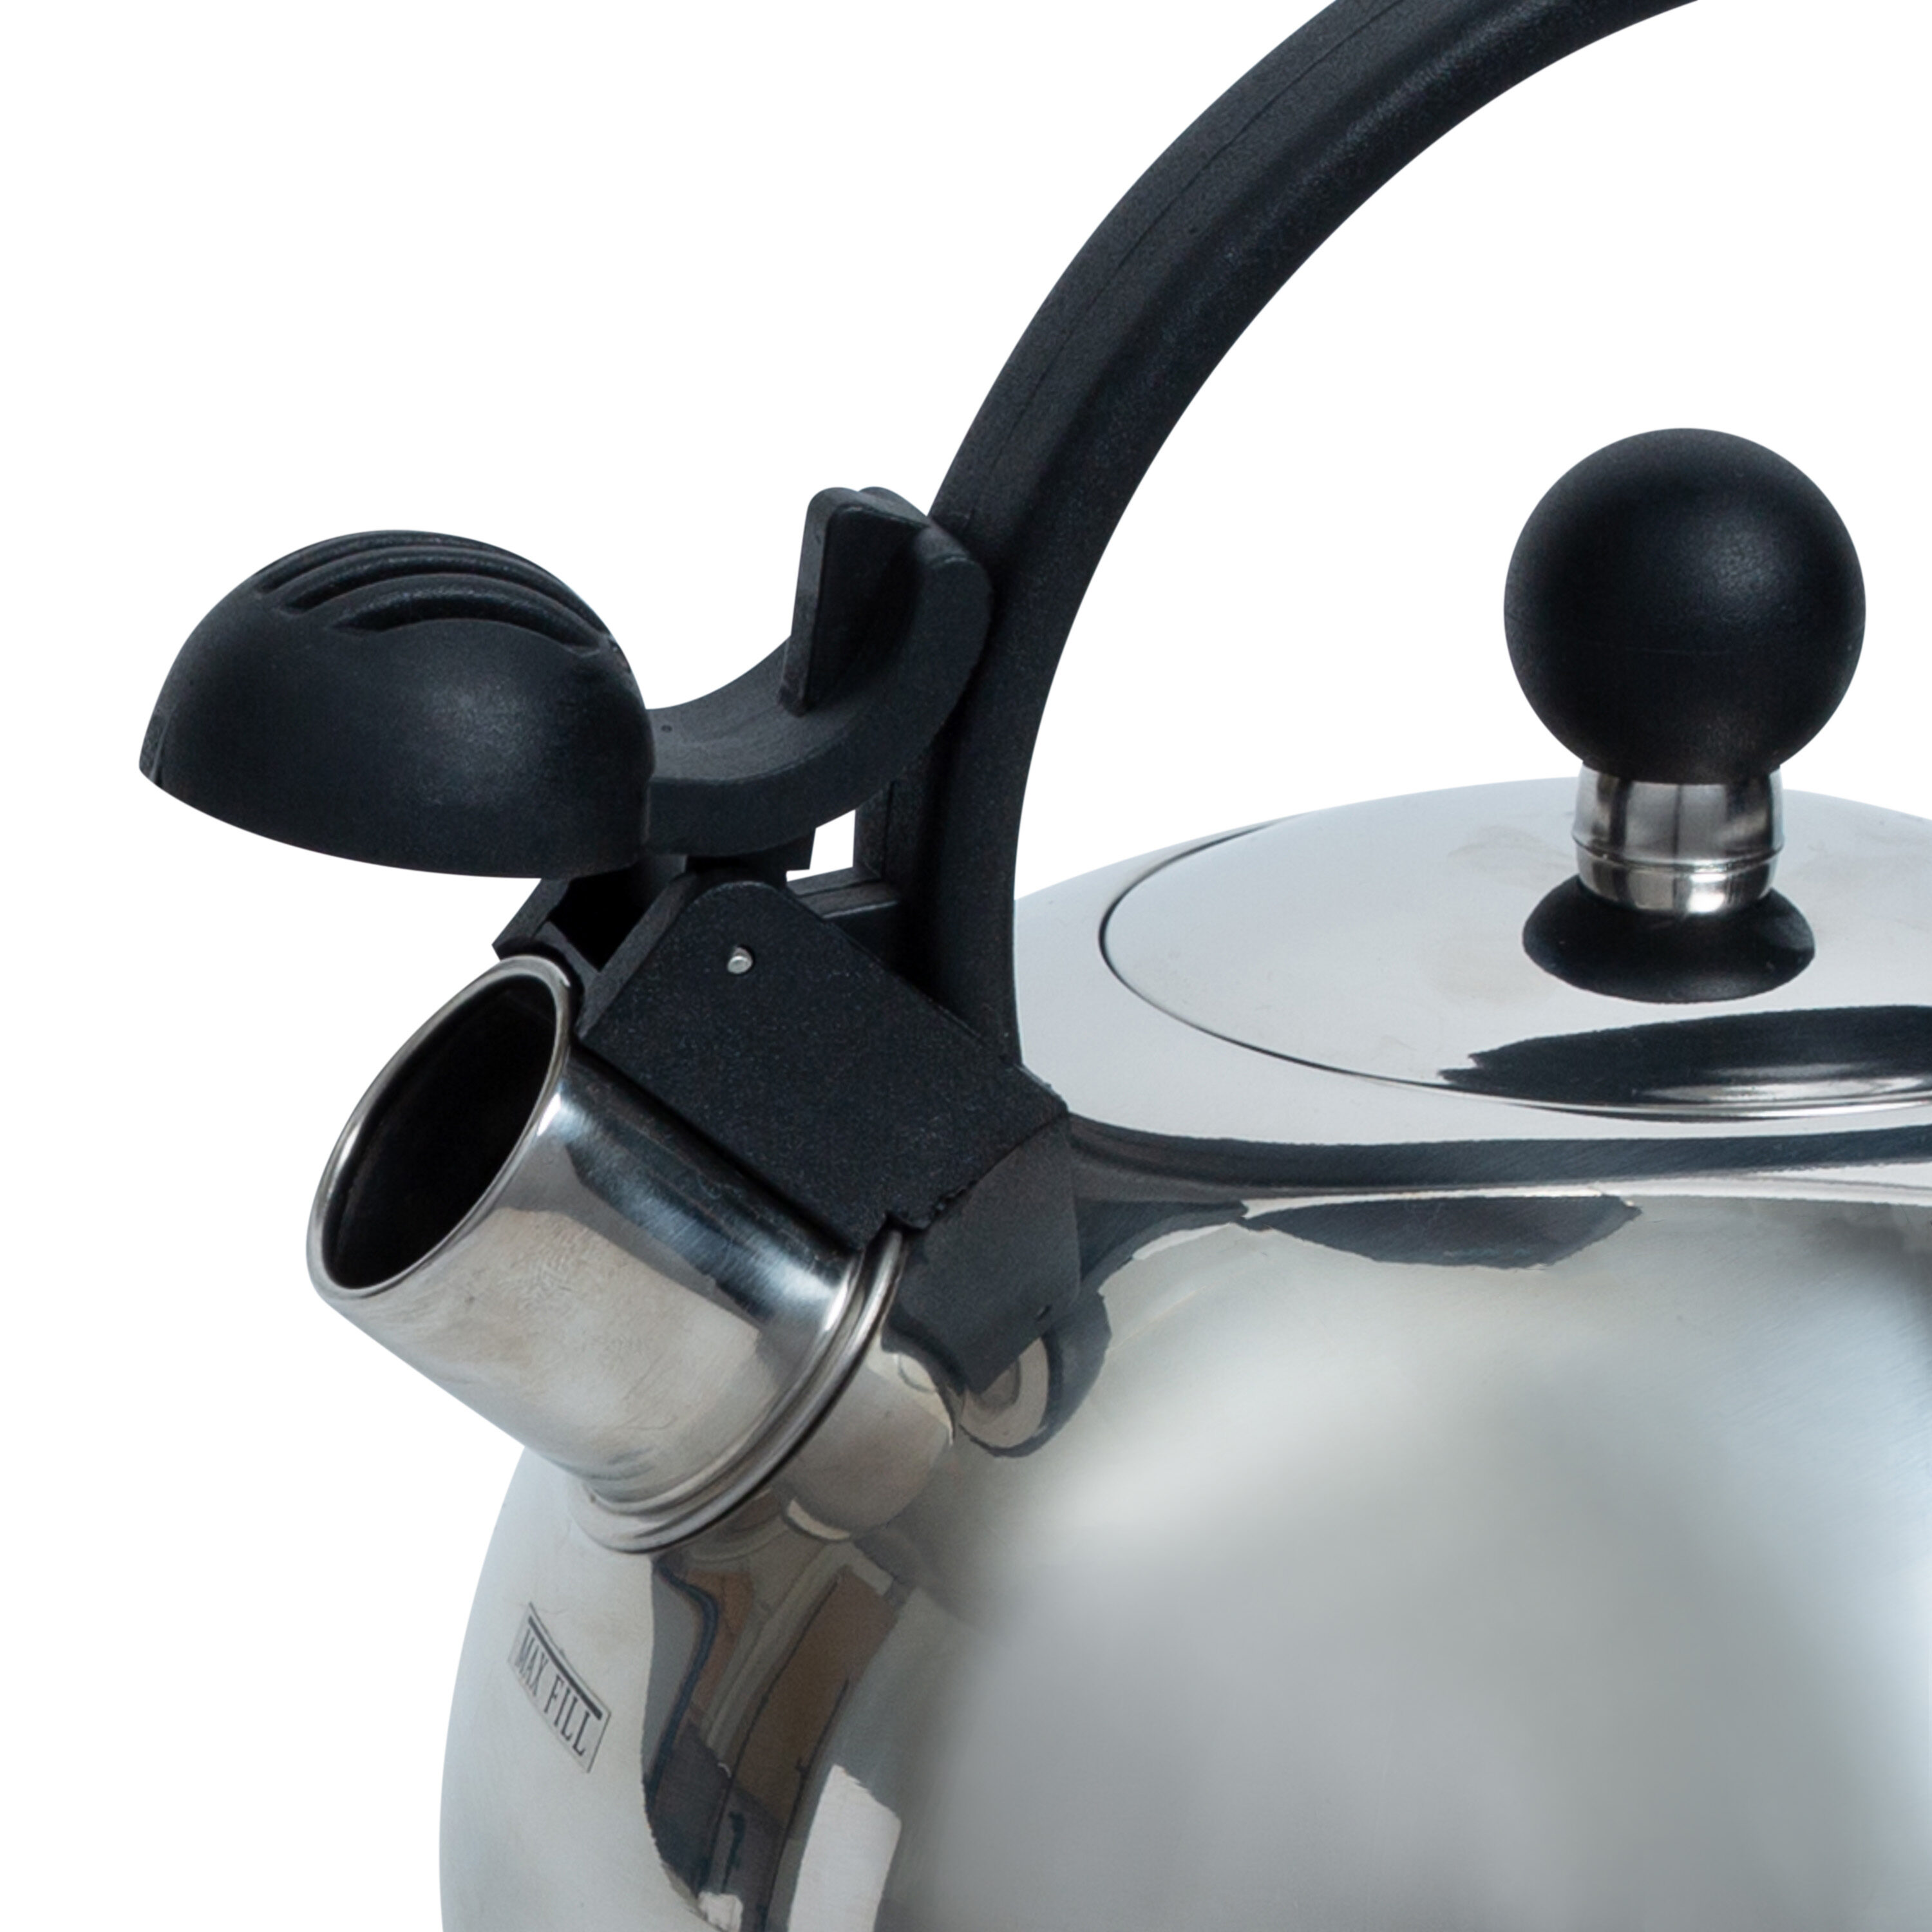 Kitchen Details 14 Cup/3.4 L Stainless Steel Tea Kettle, Red 